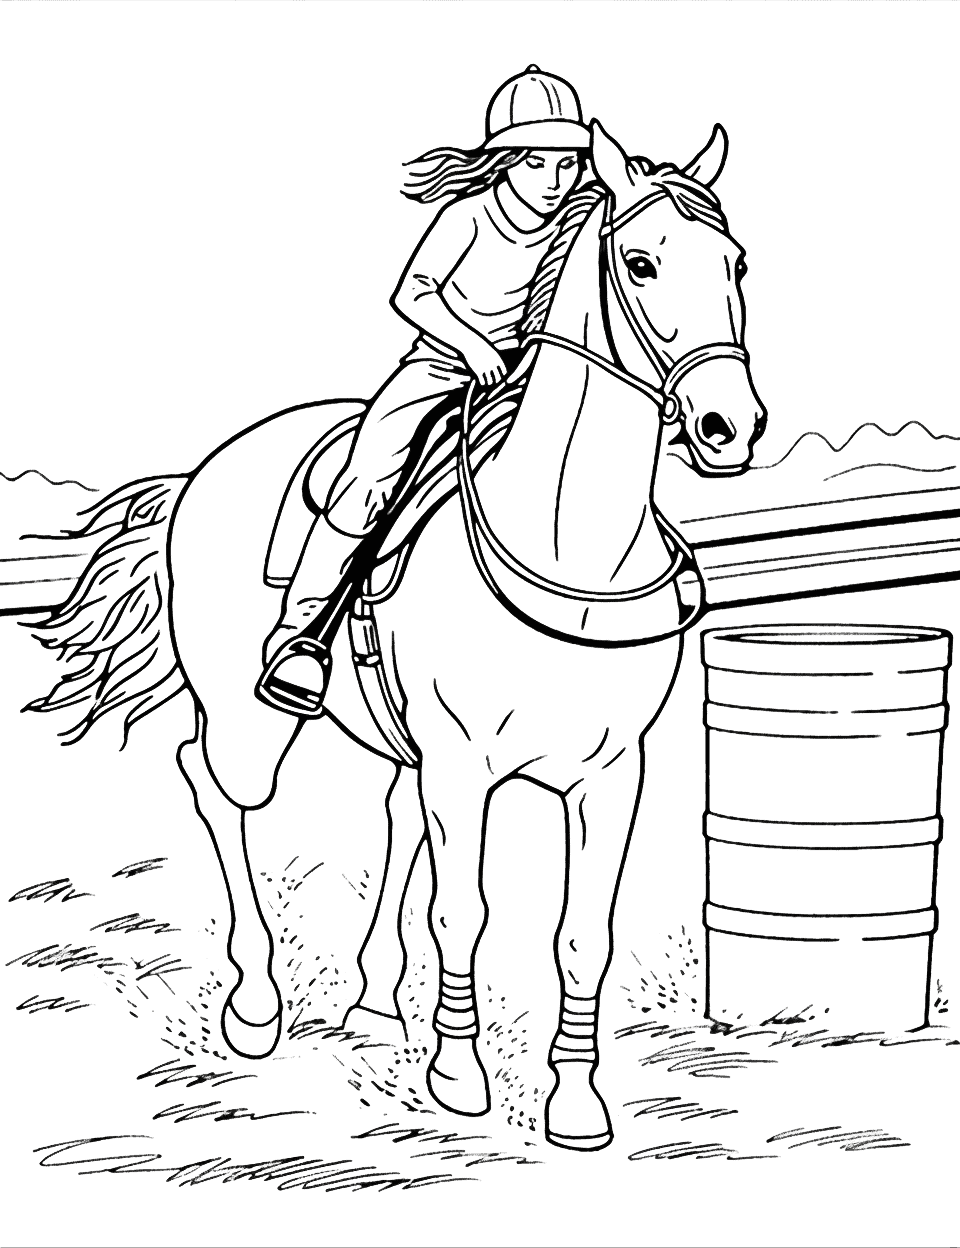 Rodeo Barrel Racing Coloring Page - A high-energy rodeo scene featuring a horse and rider team in a barrel racing event.